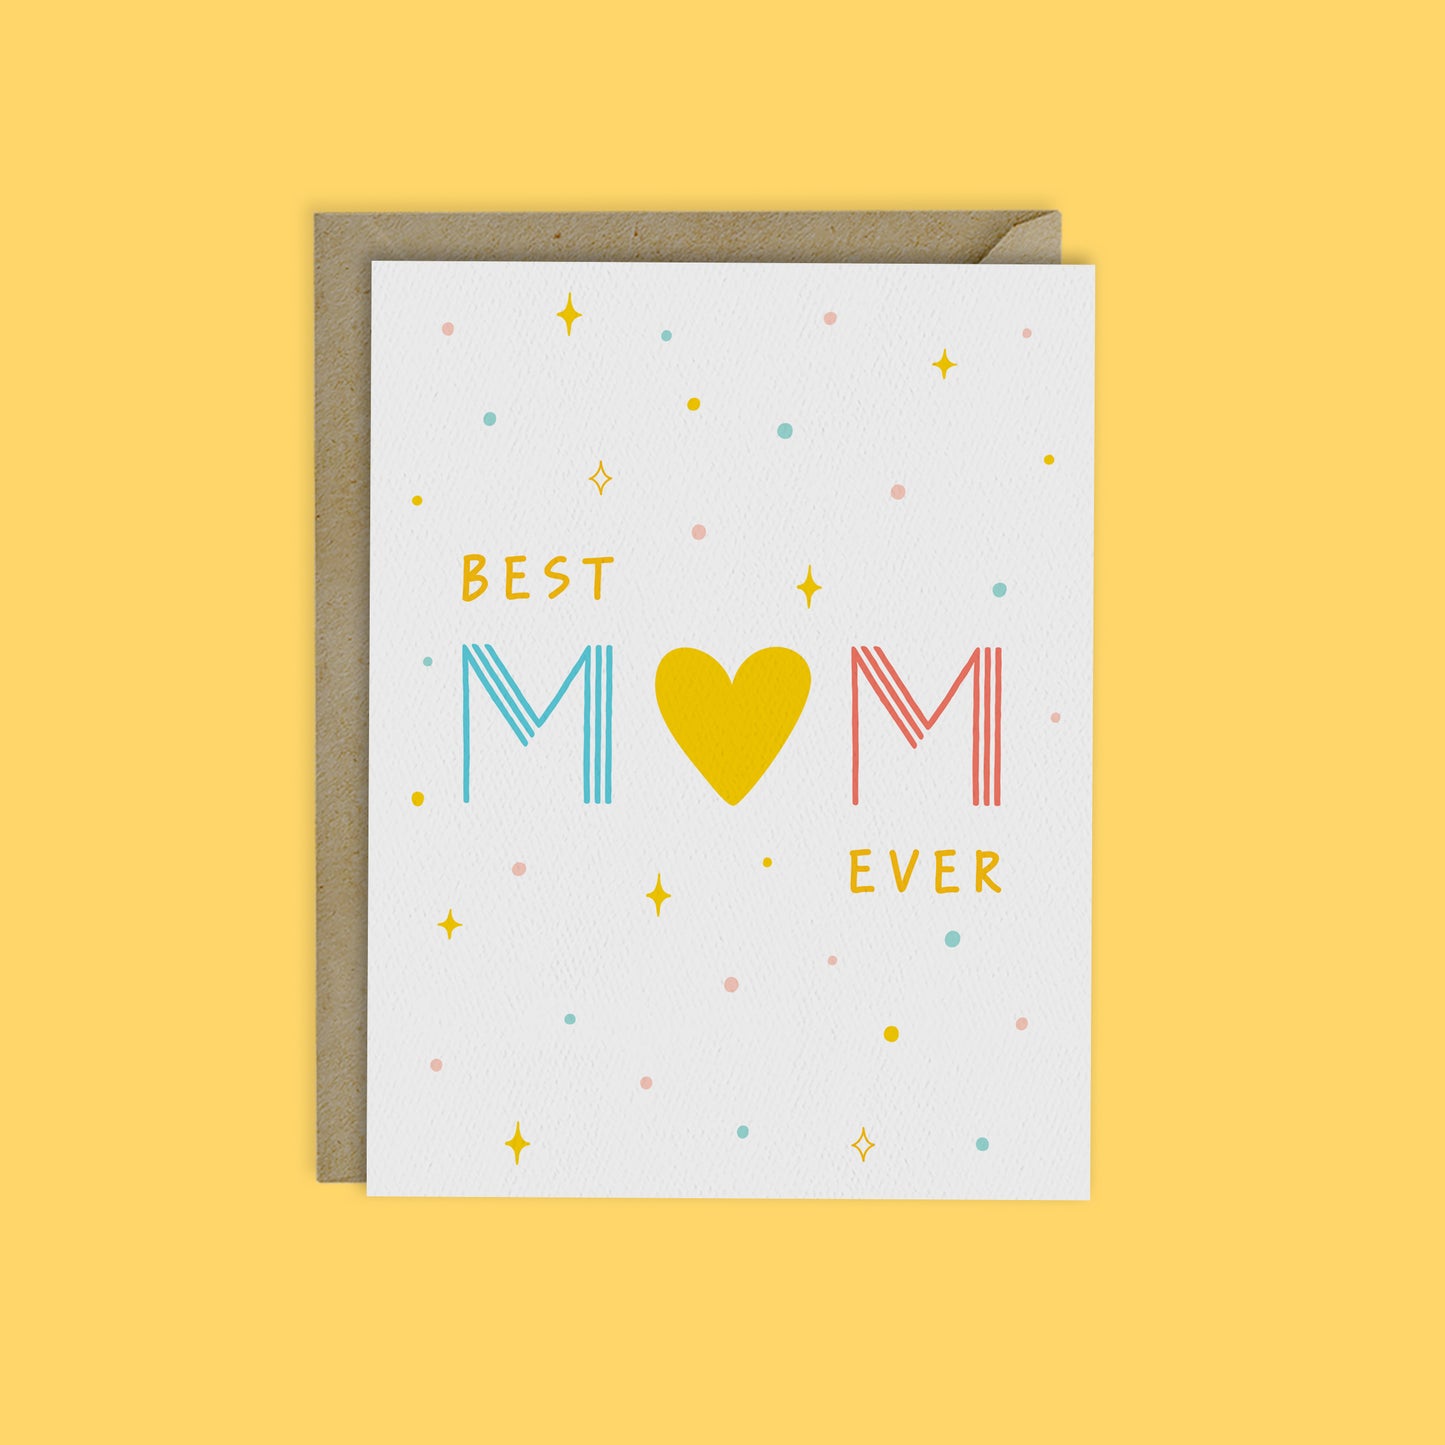 BEST MOM EVER - Mothers Day Card